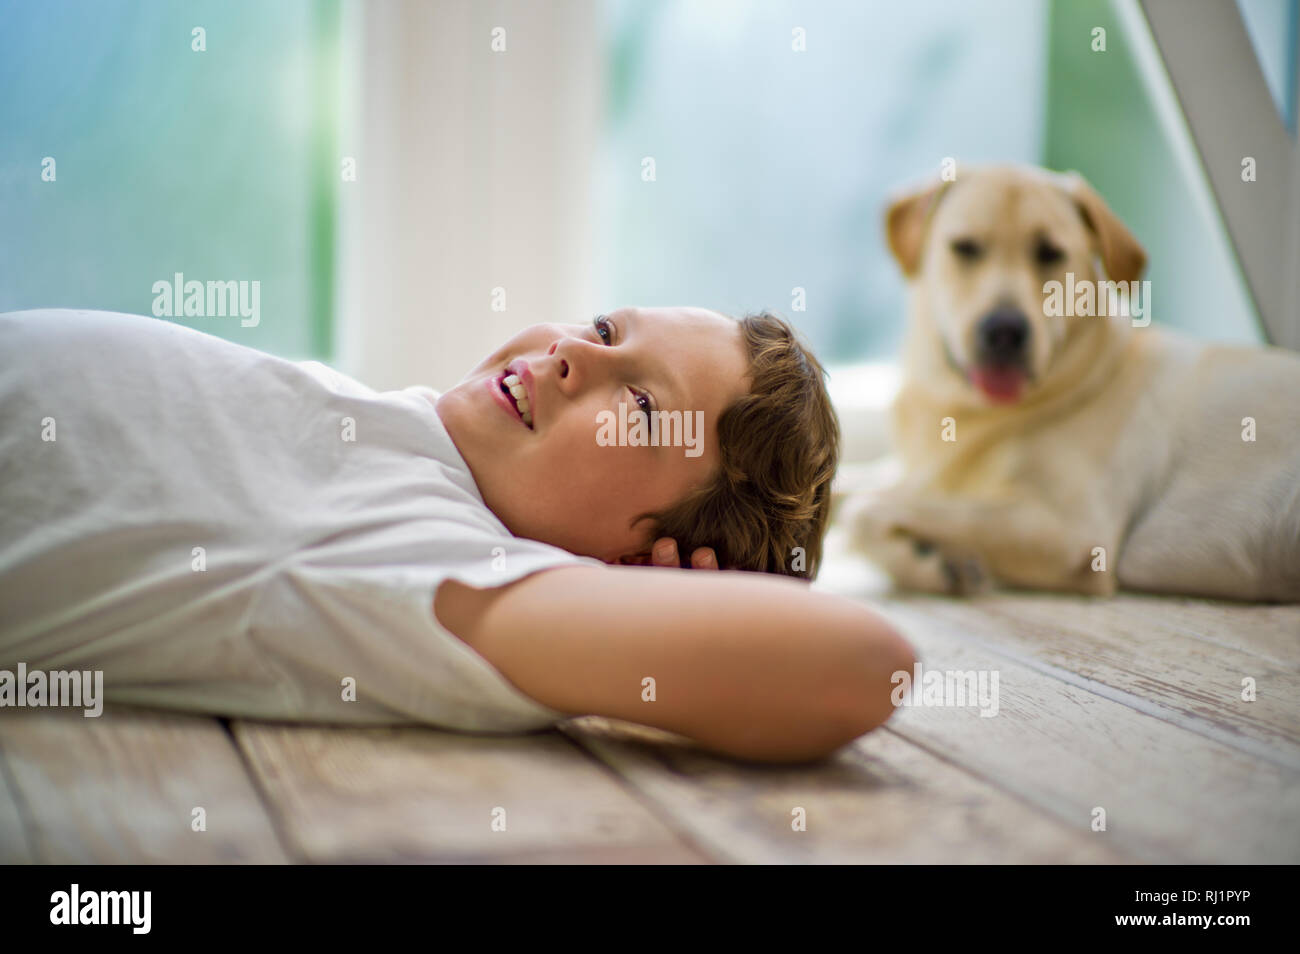 Smiling teenage boy daydreaming while lying with hands behind his head on a hardwood floor. Stock Photo